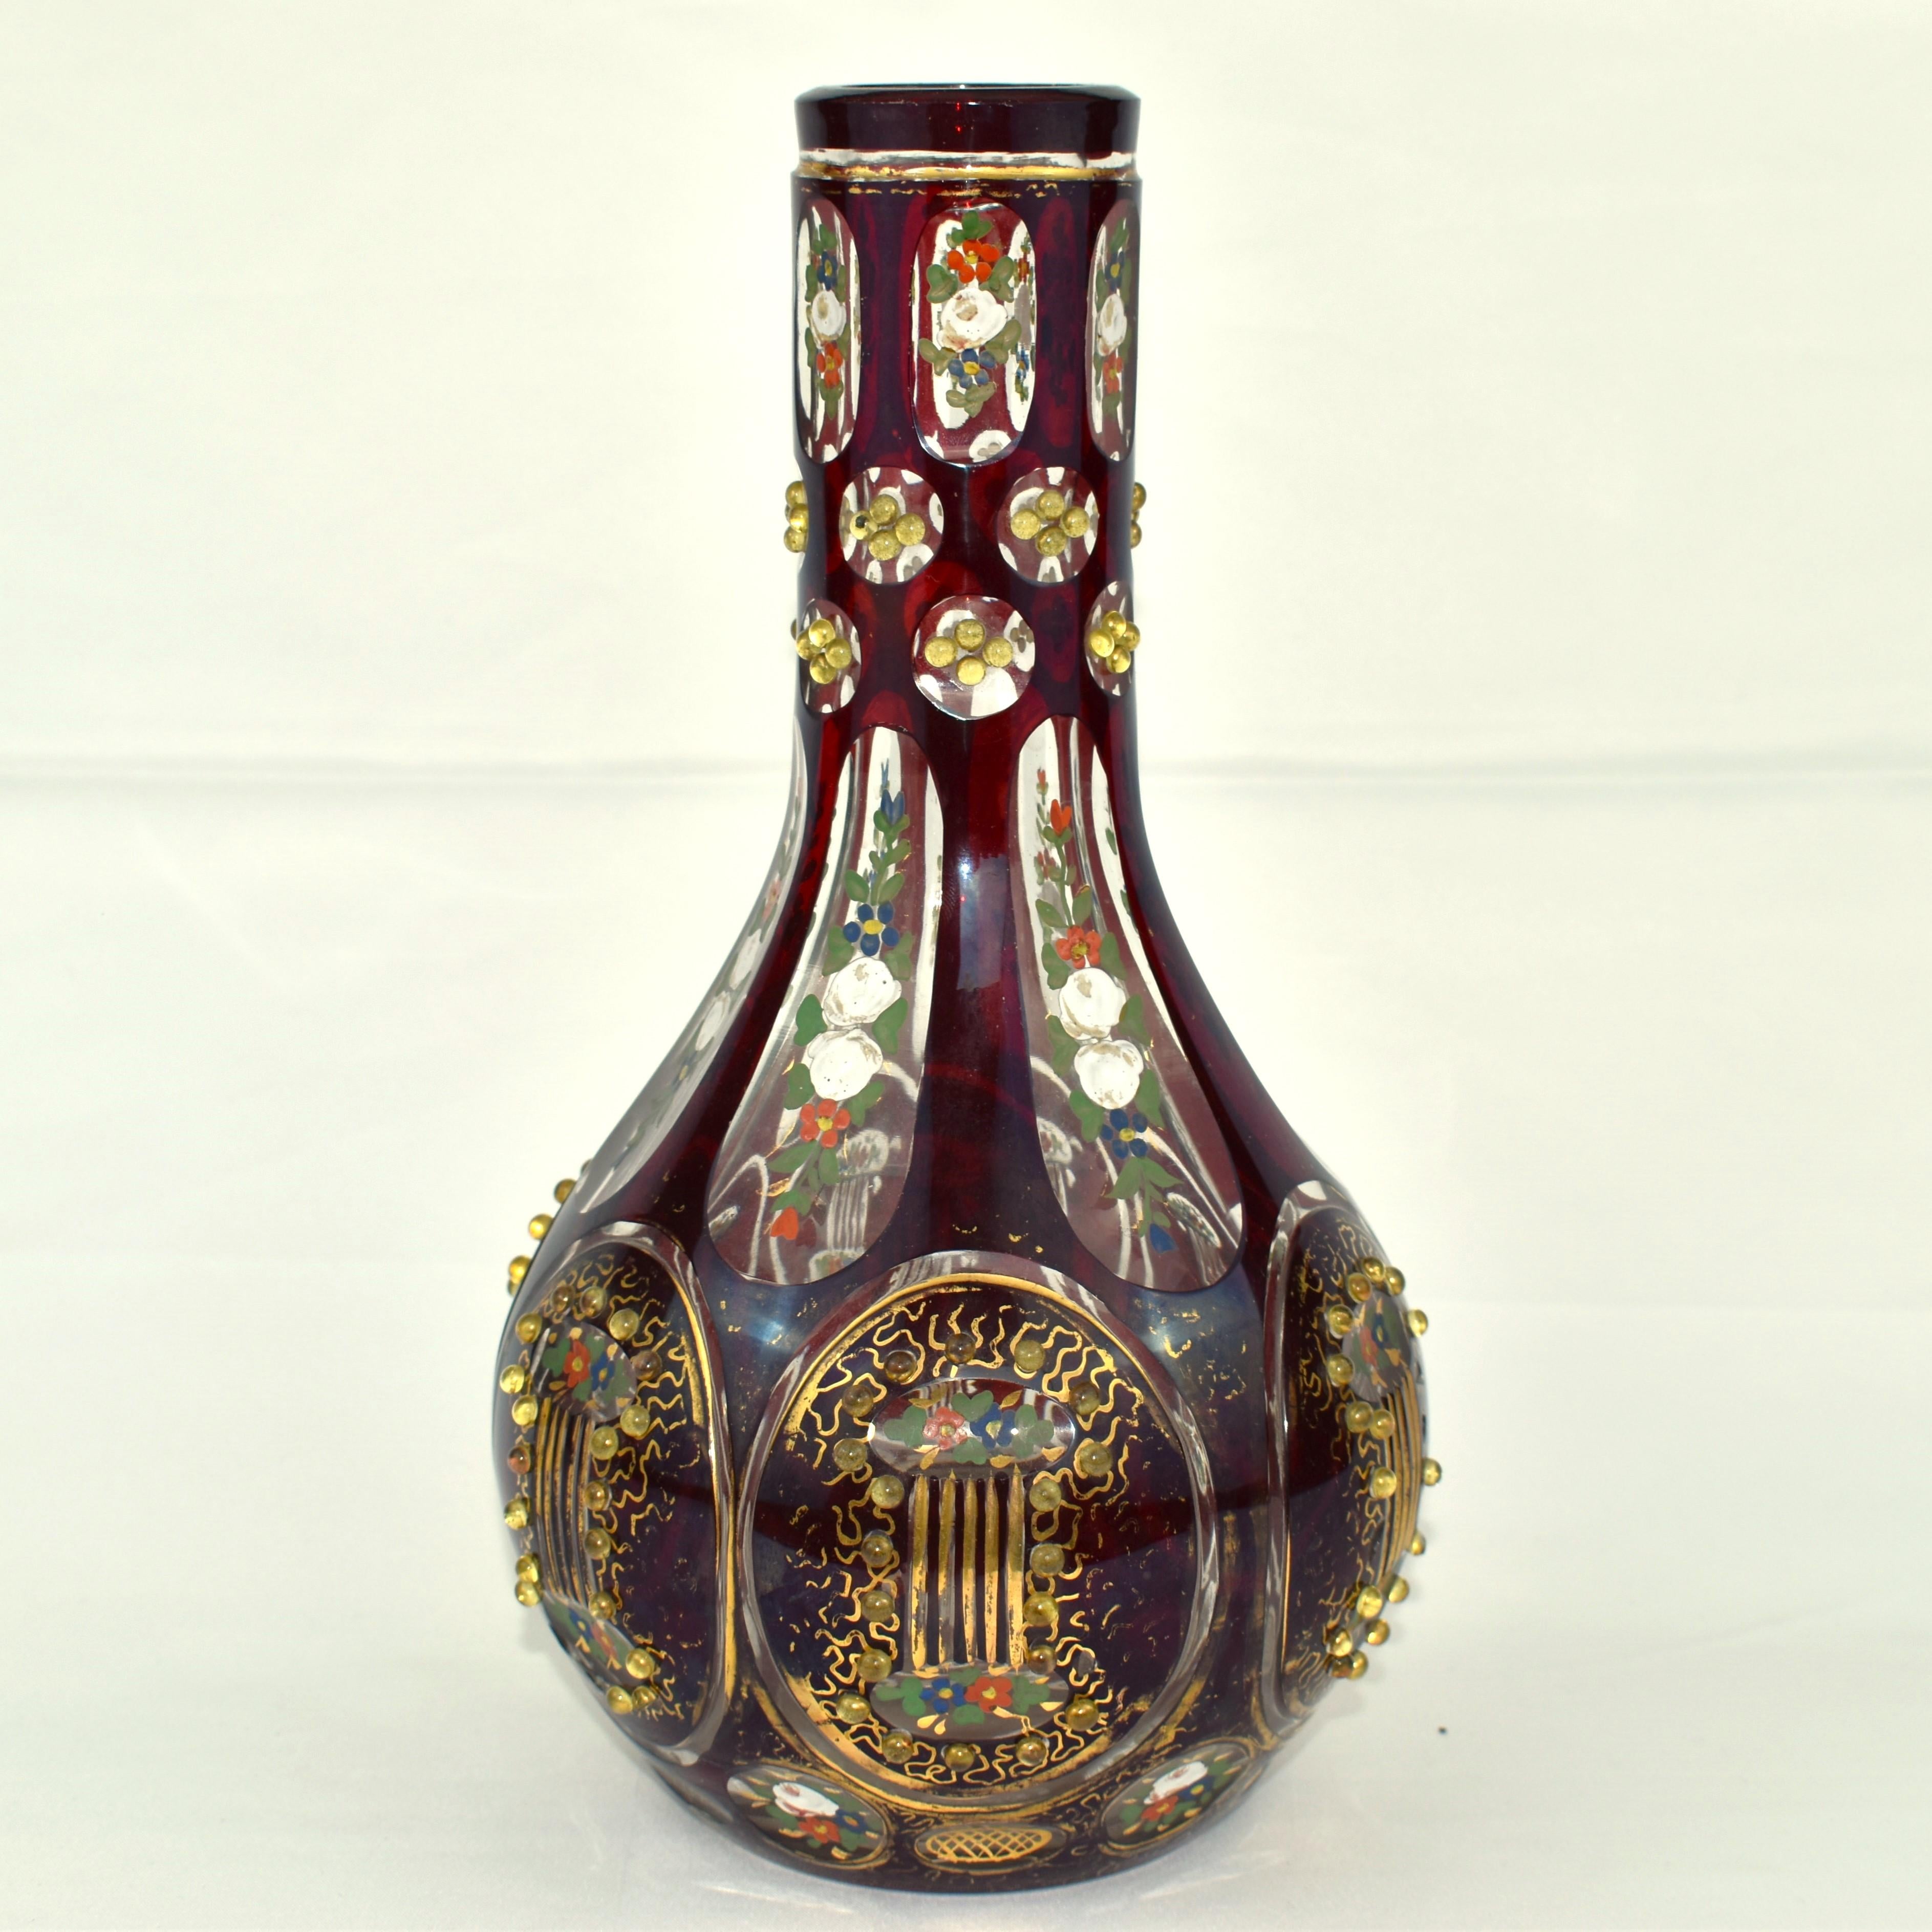 A Beautiful Bohemian Ruby Red Hookah Vase

Overlaid Cut-Glass

Decorated with Jewel Beads and Gilded Enamel

Made for the Ottoman Market in the Early 19th Century

Bohemia, Circa 1840